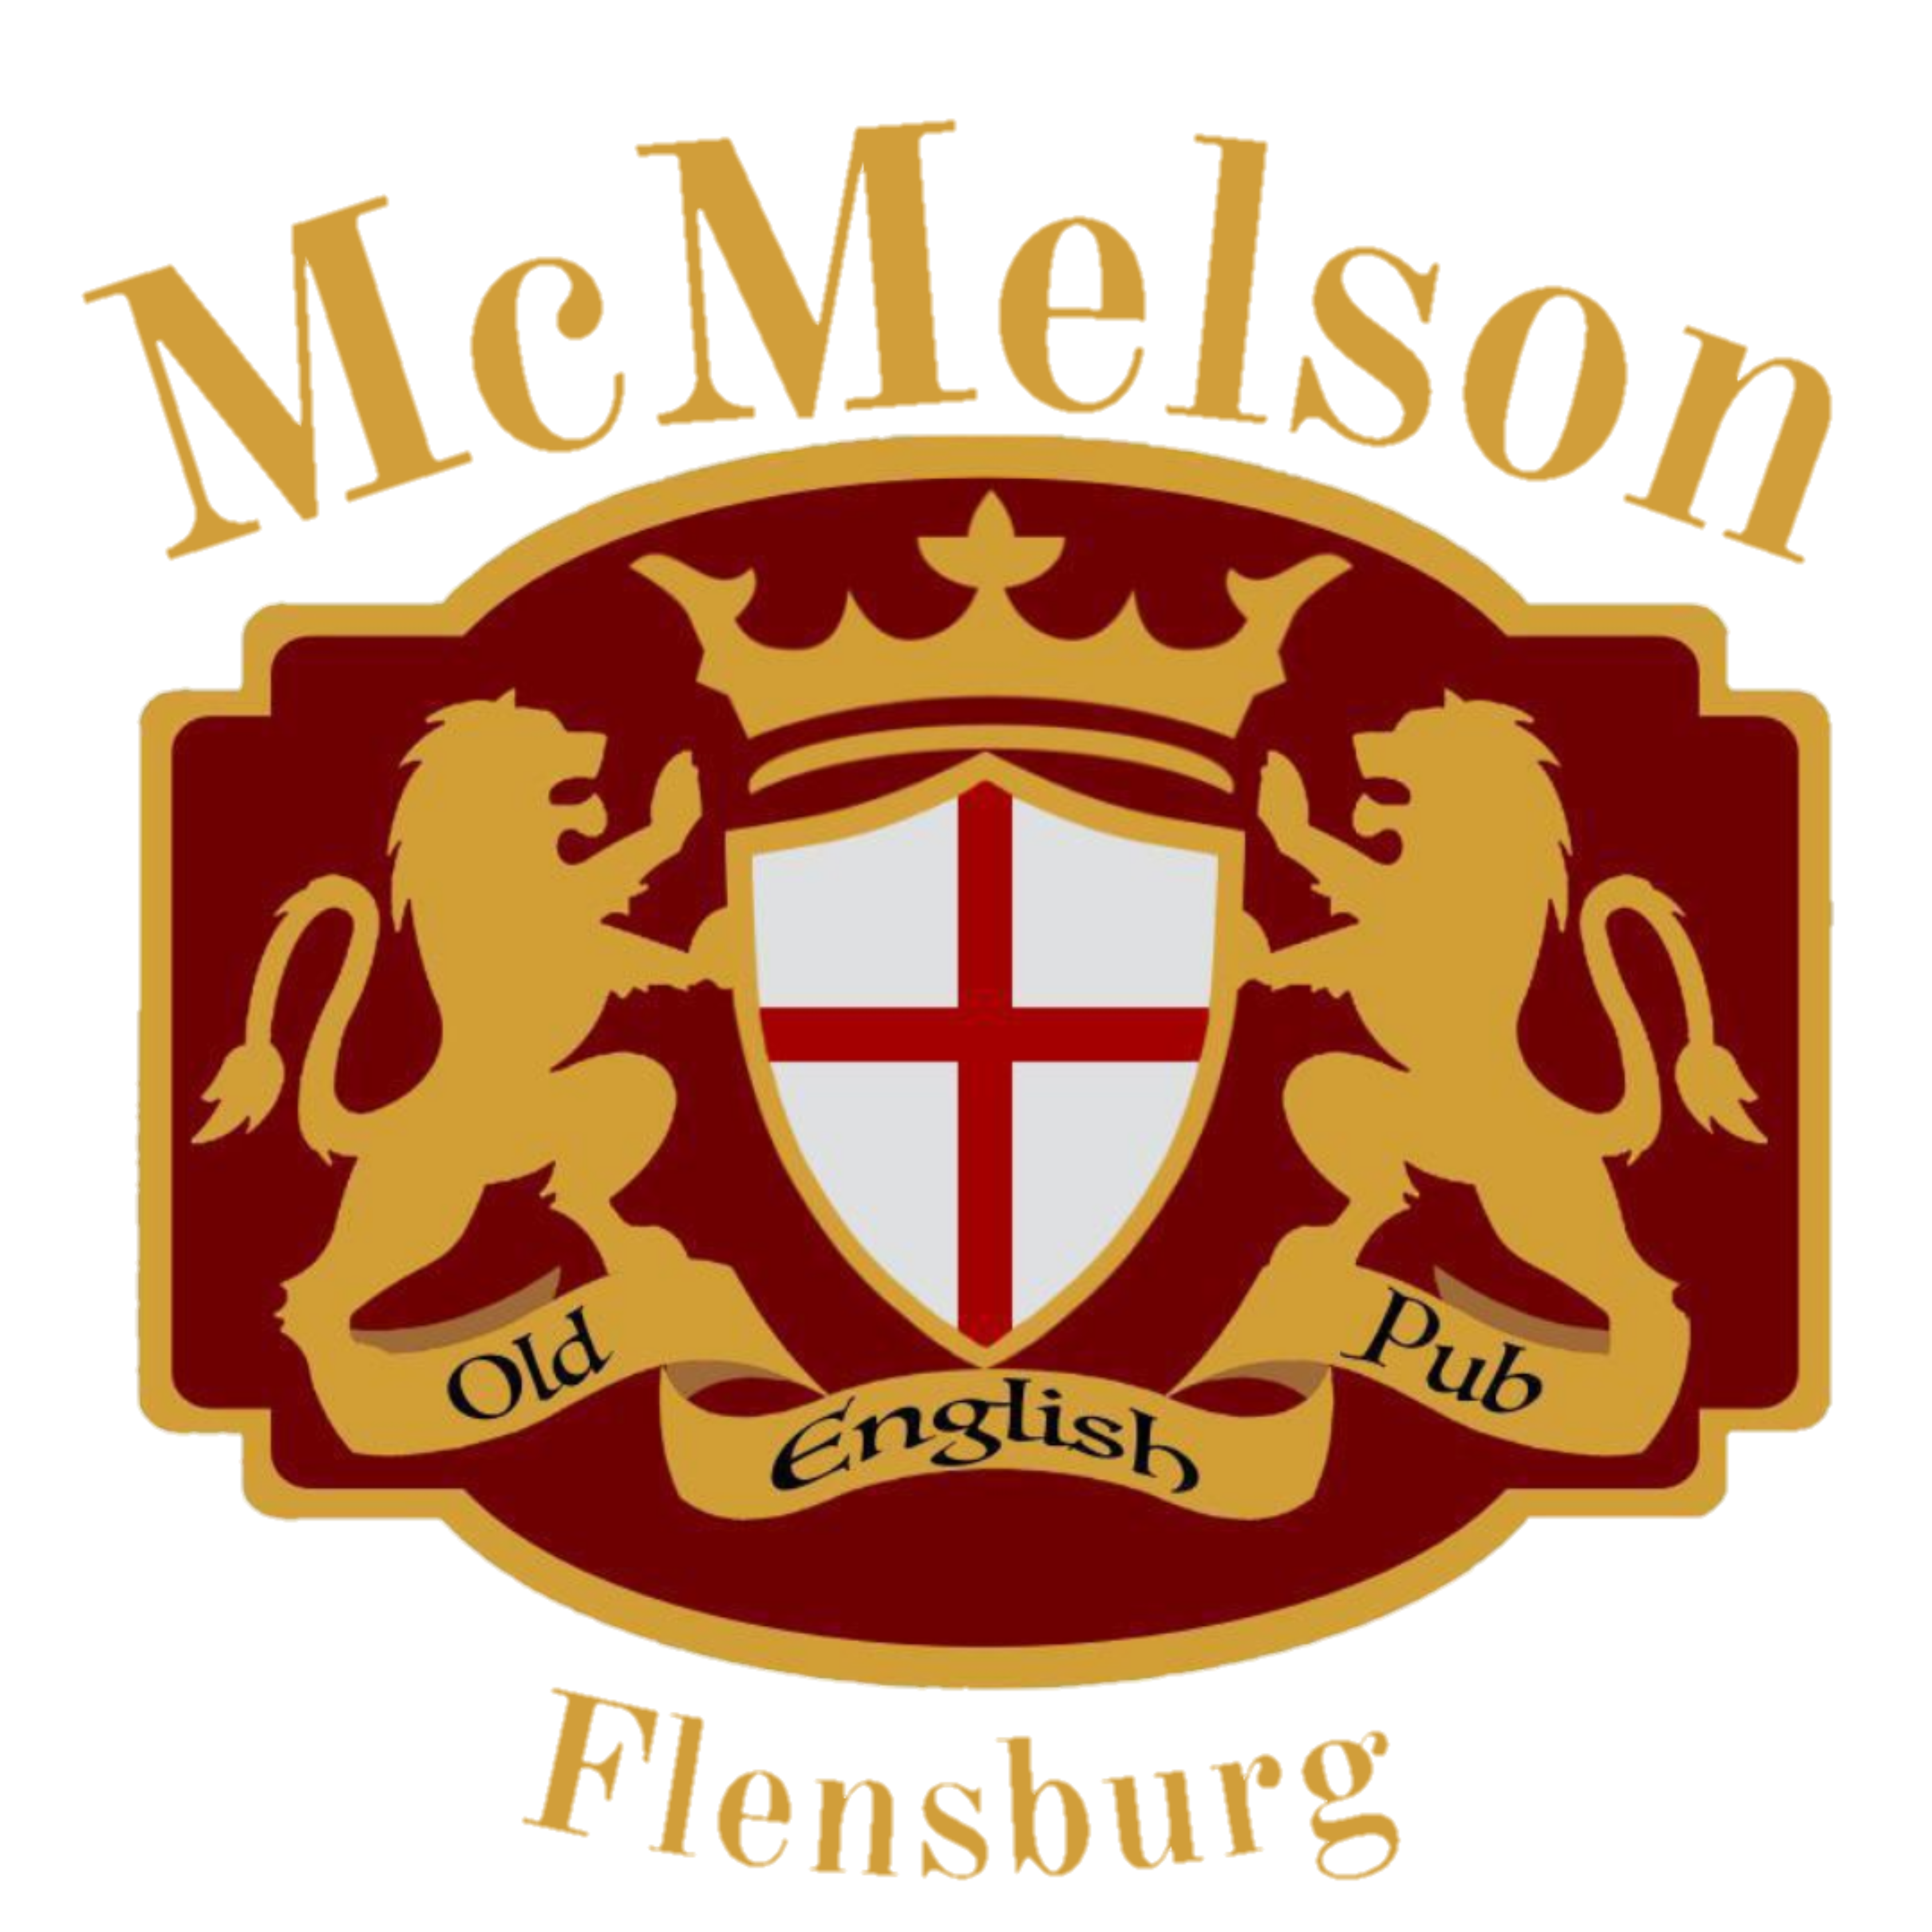 McMelson Old English Pub